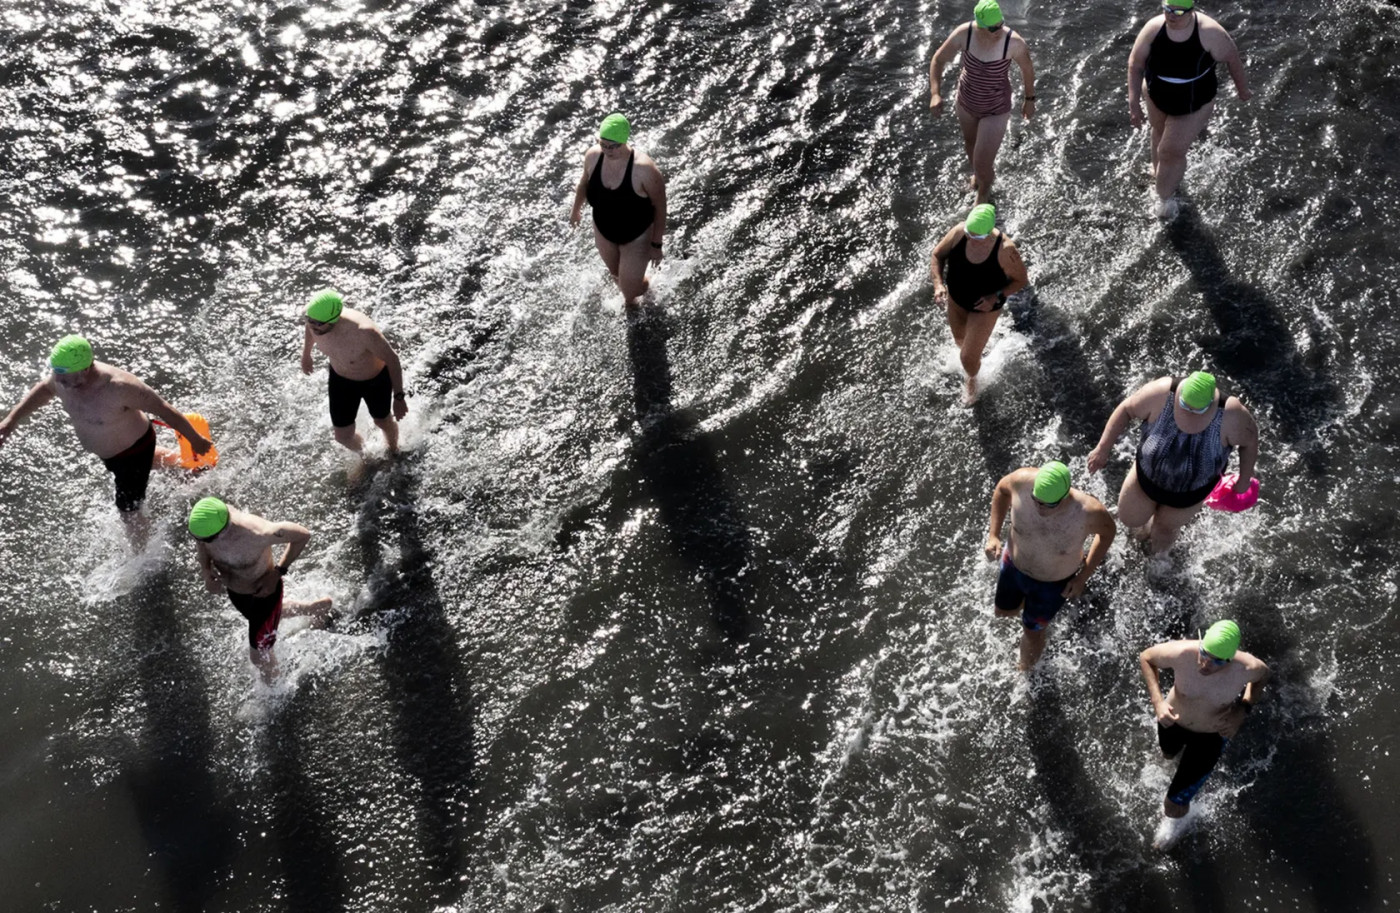 Swimmers run to deeper water during the 1-mile open swim competition at Great Salt Lake State Park in Magna on Saturday, June 11, 2022.Laura Seitz, Deseret News